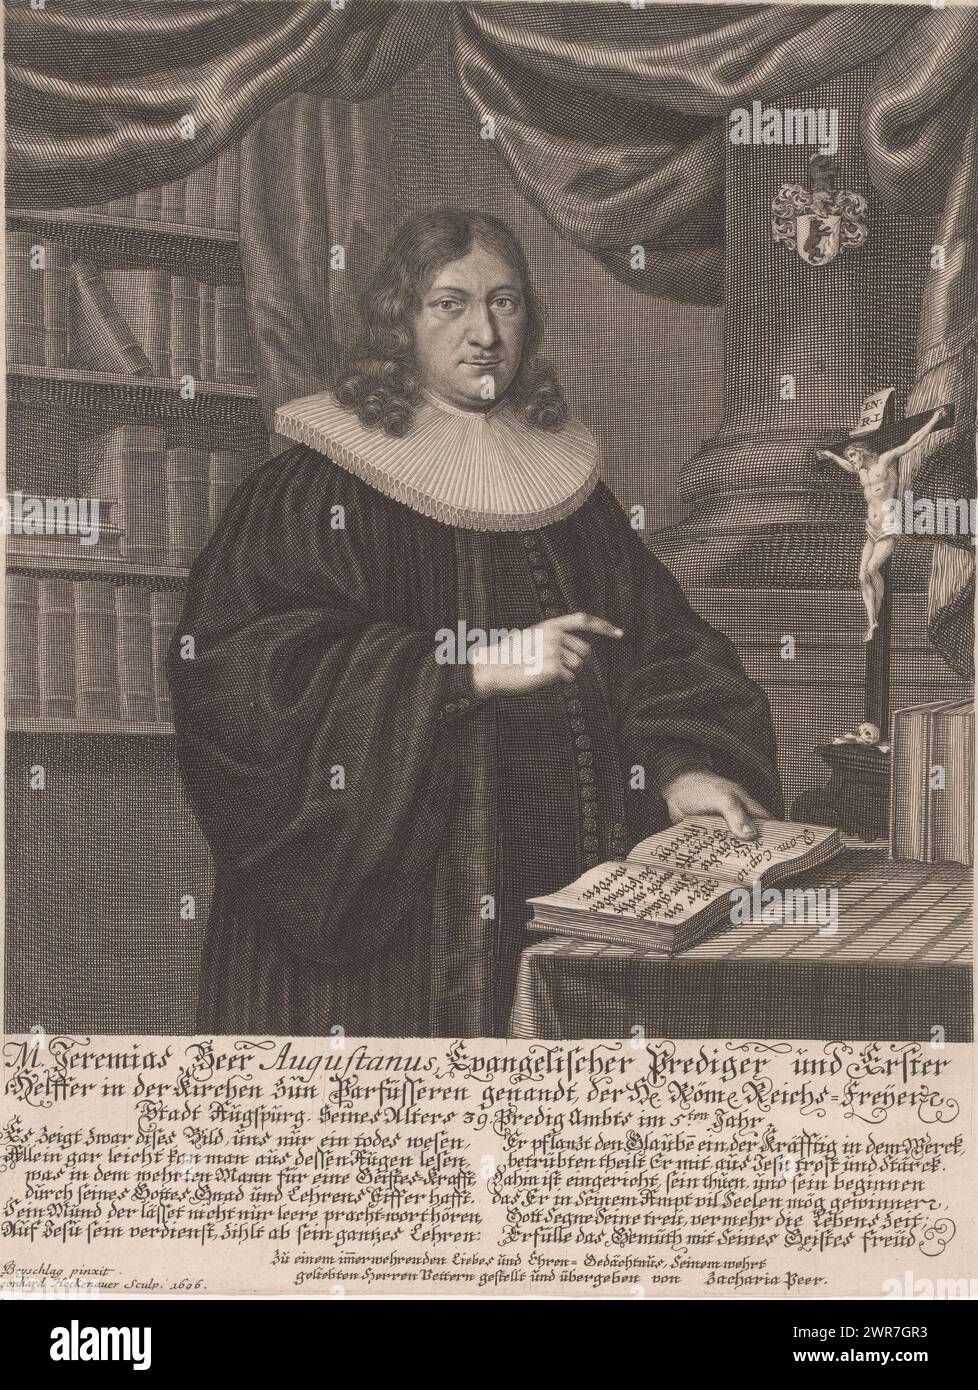 Portrait of Jeremias Beer at the age of 39, with caption in German., print maker: Leonhard Heckenauer, after painting by: Johann Christoph Beischlag, Zacharias Beer, 1696, paper, engraving, height 312 mm × width 240 mm, print Stock Photo